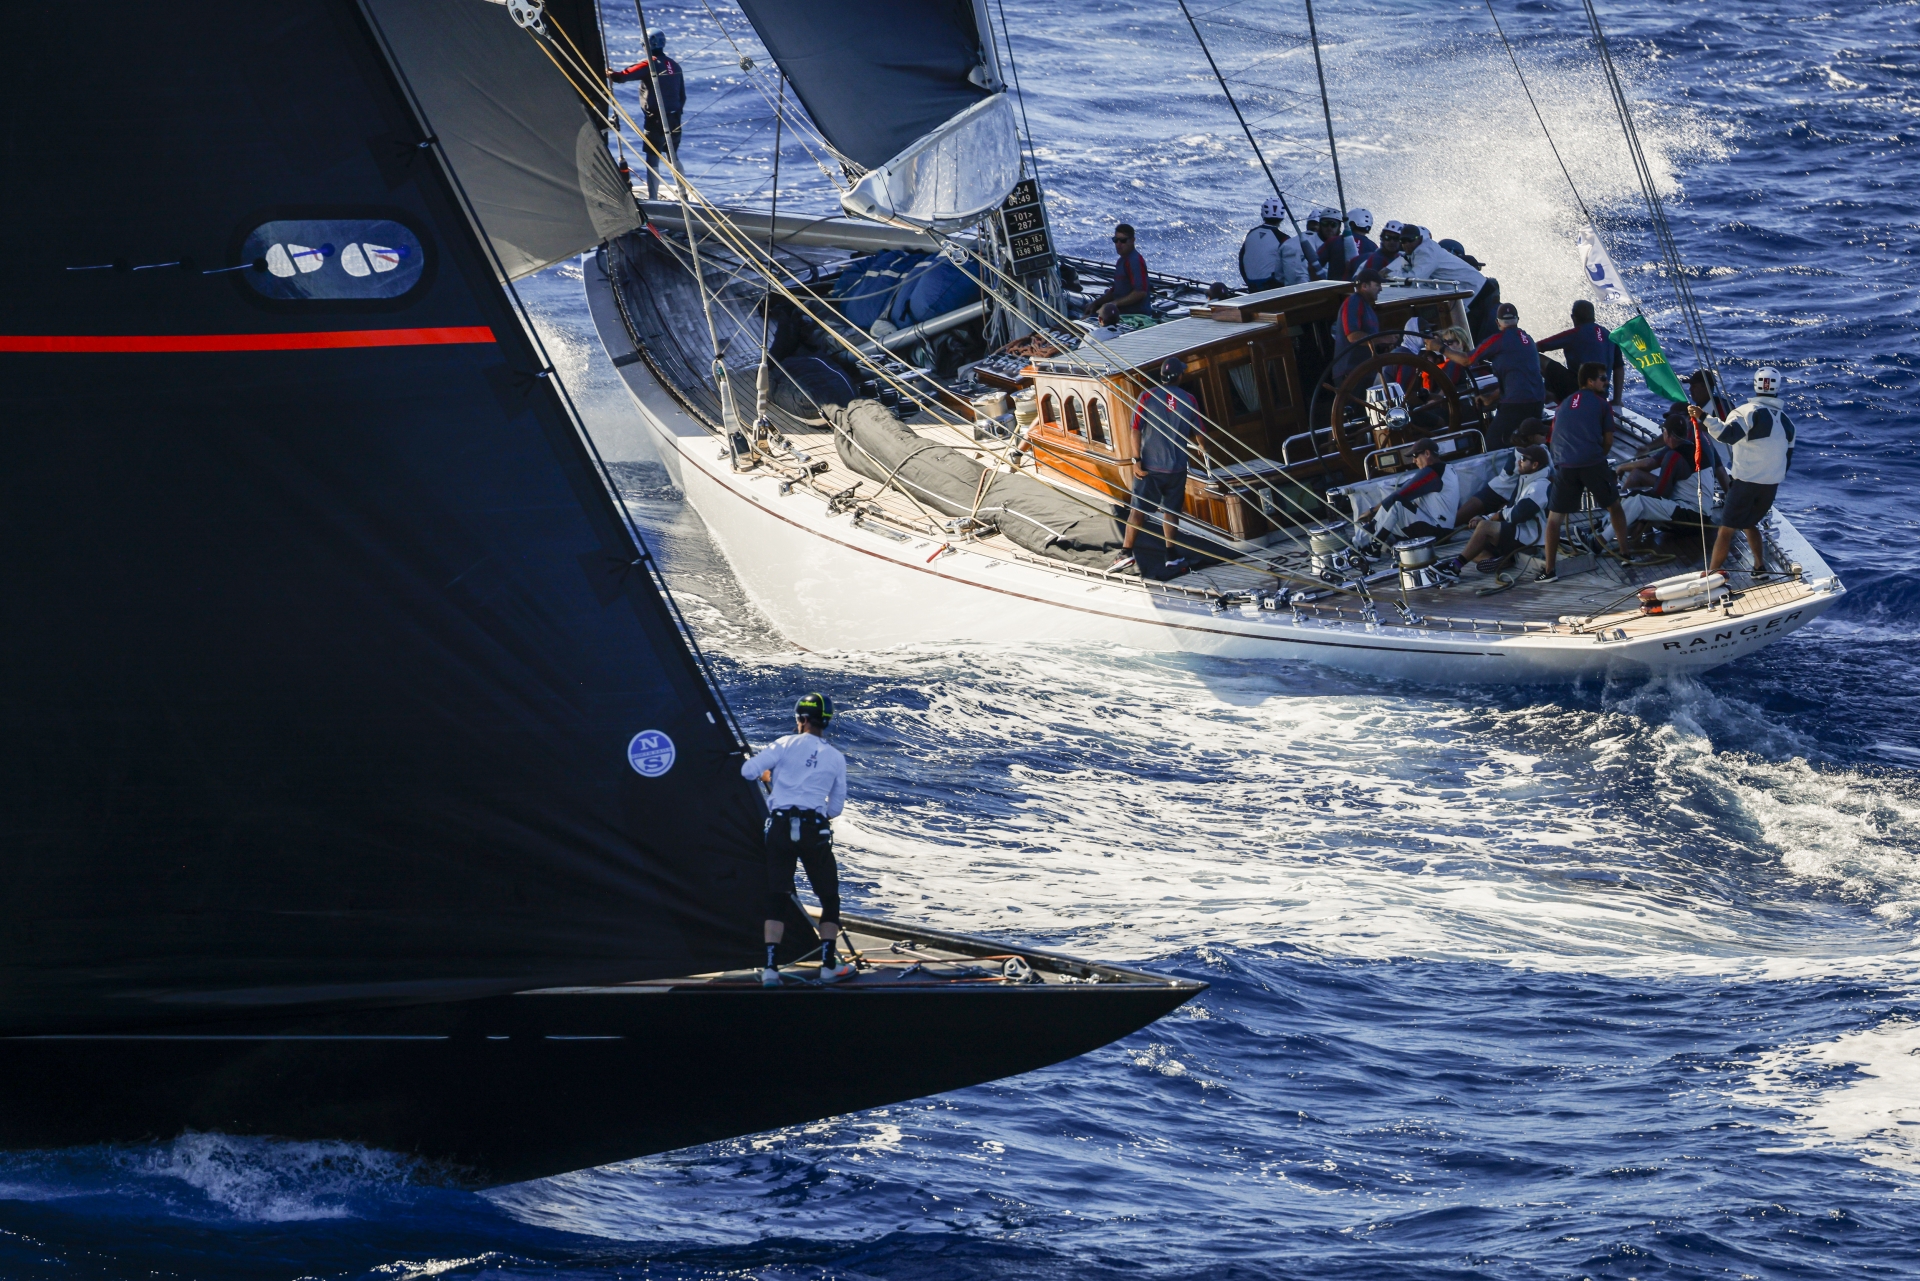 Perfect conditions at the second to last day of the Maxi Yacht Rolex Cup - News - Yacht Club Costa Smeralda